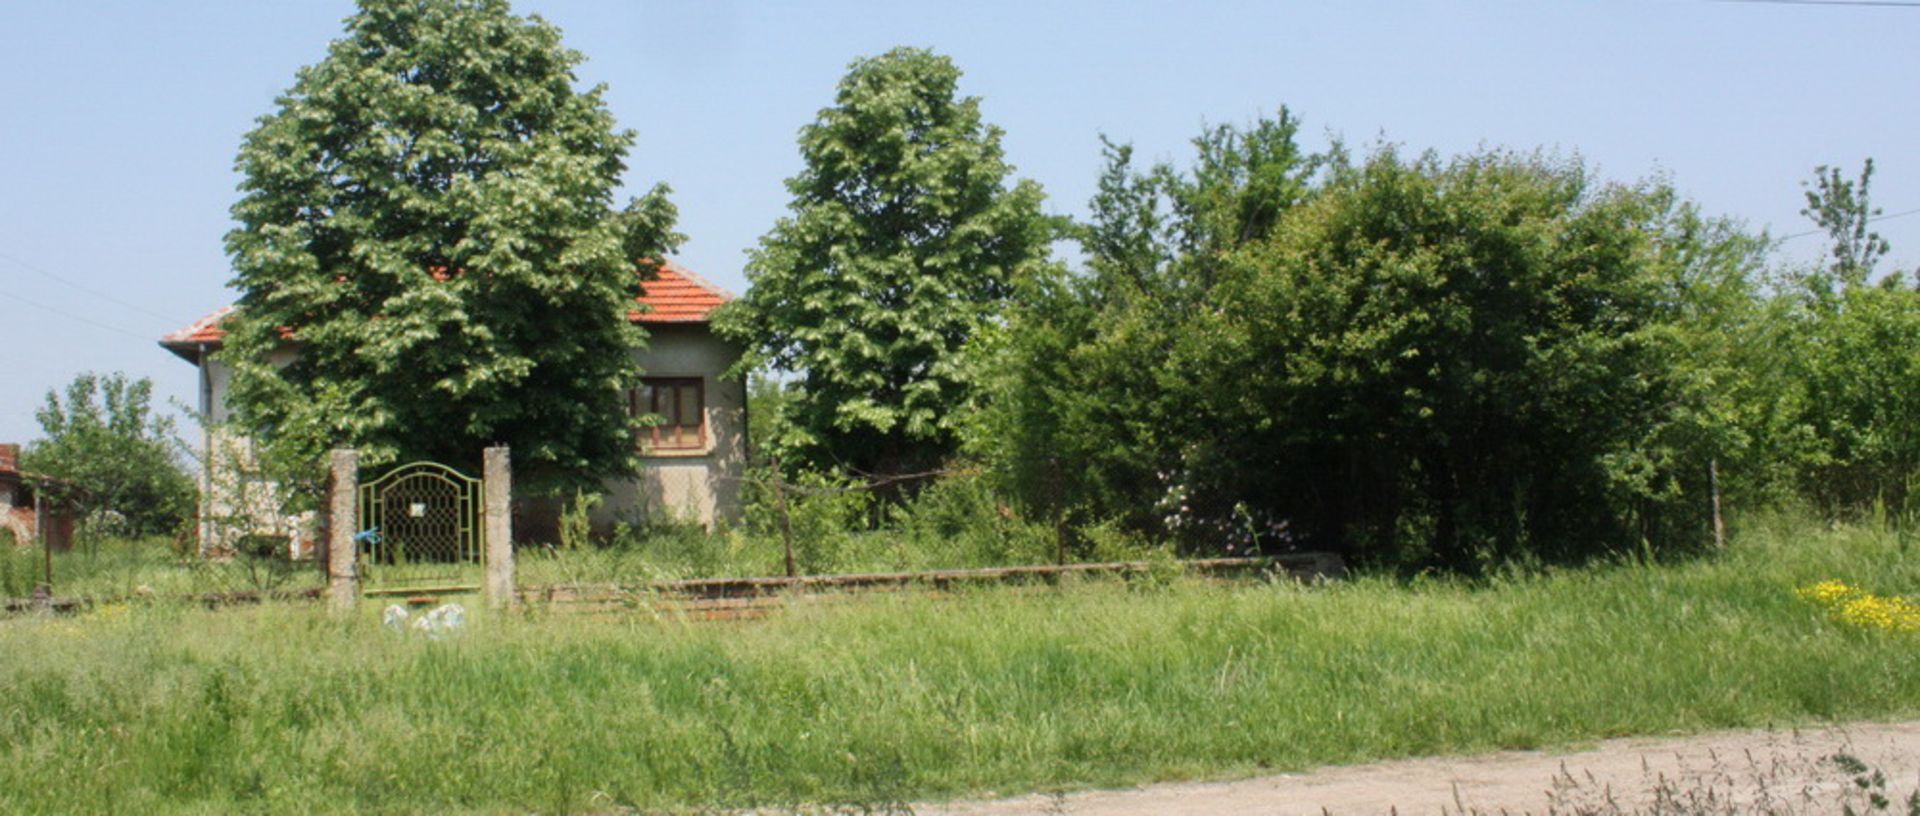 NICE HOUSE, OVER 1/2 ACRE BOROVAN + TWO OUTBUILDINGS AND 2,400 SQM OF LAND BULGARIA - Image 9 of 30